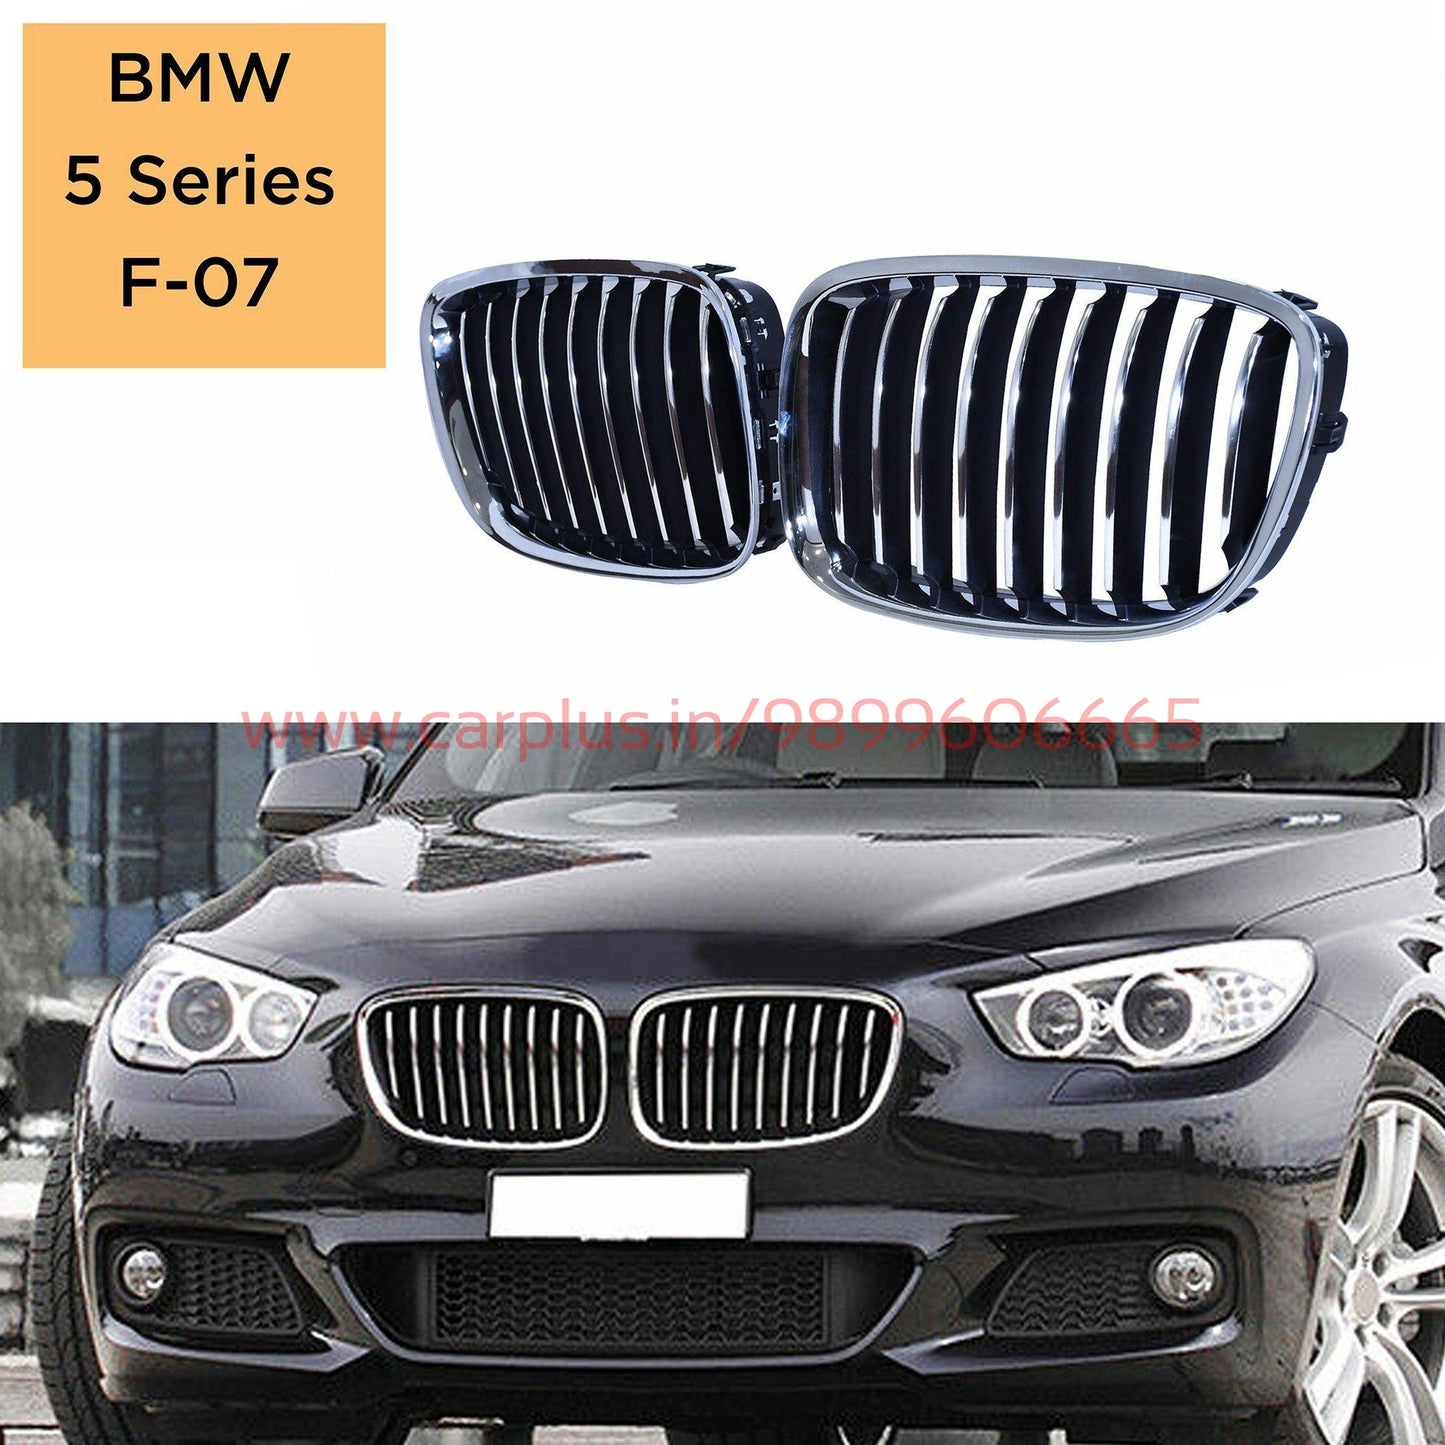 https://www.carplus.in/cdn/shop/products/KMH-OEM-Replacement-Grill-For-BMW-5-Series-GT-F07-Outer-Chrome-with-Chrome-N-Black-Fins-Set-Of-2Pcs-GRILLS-KMH-GRILLS_1445x.jpg?v=1631987995